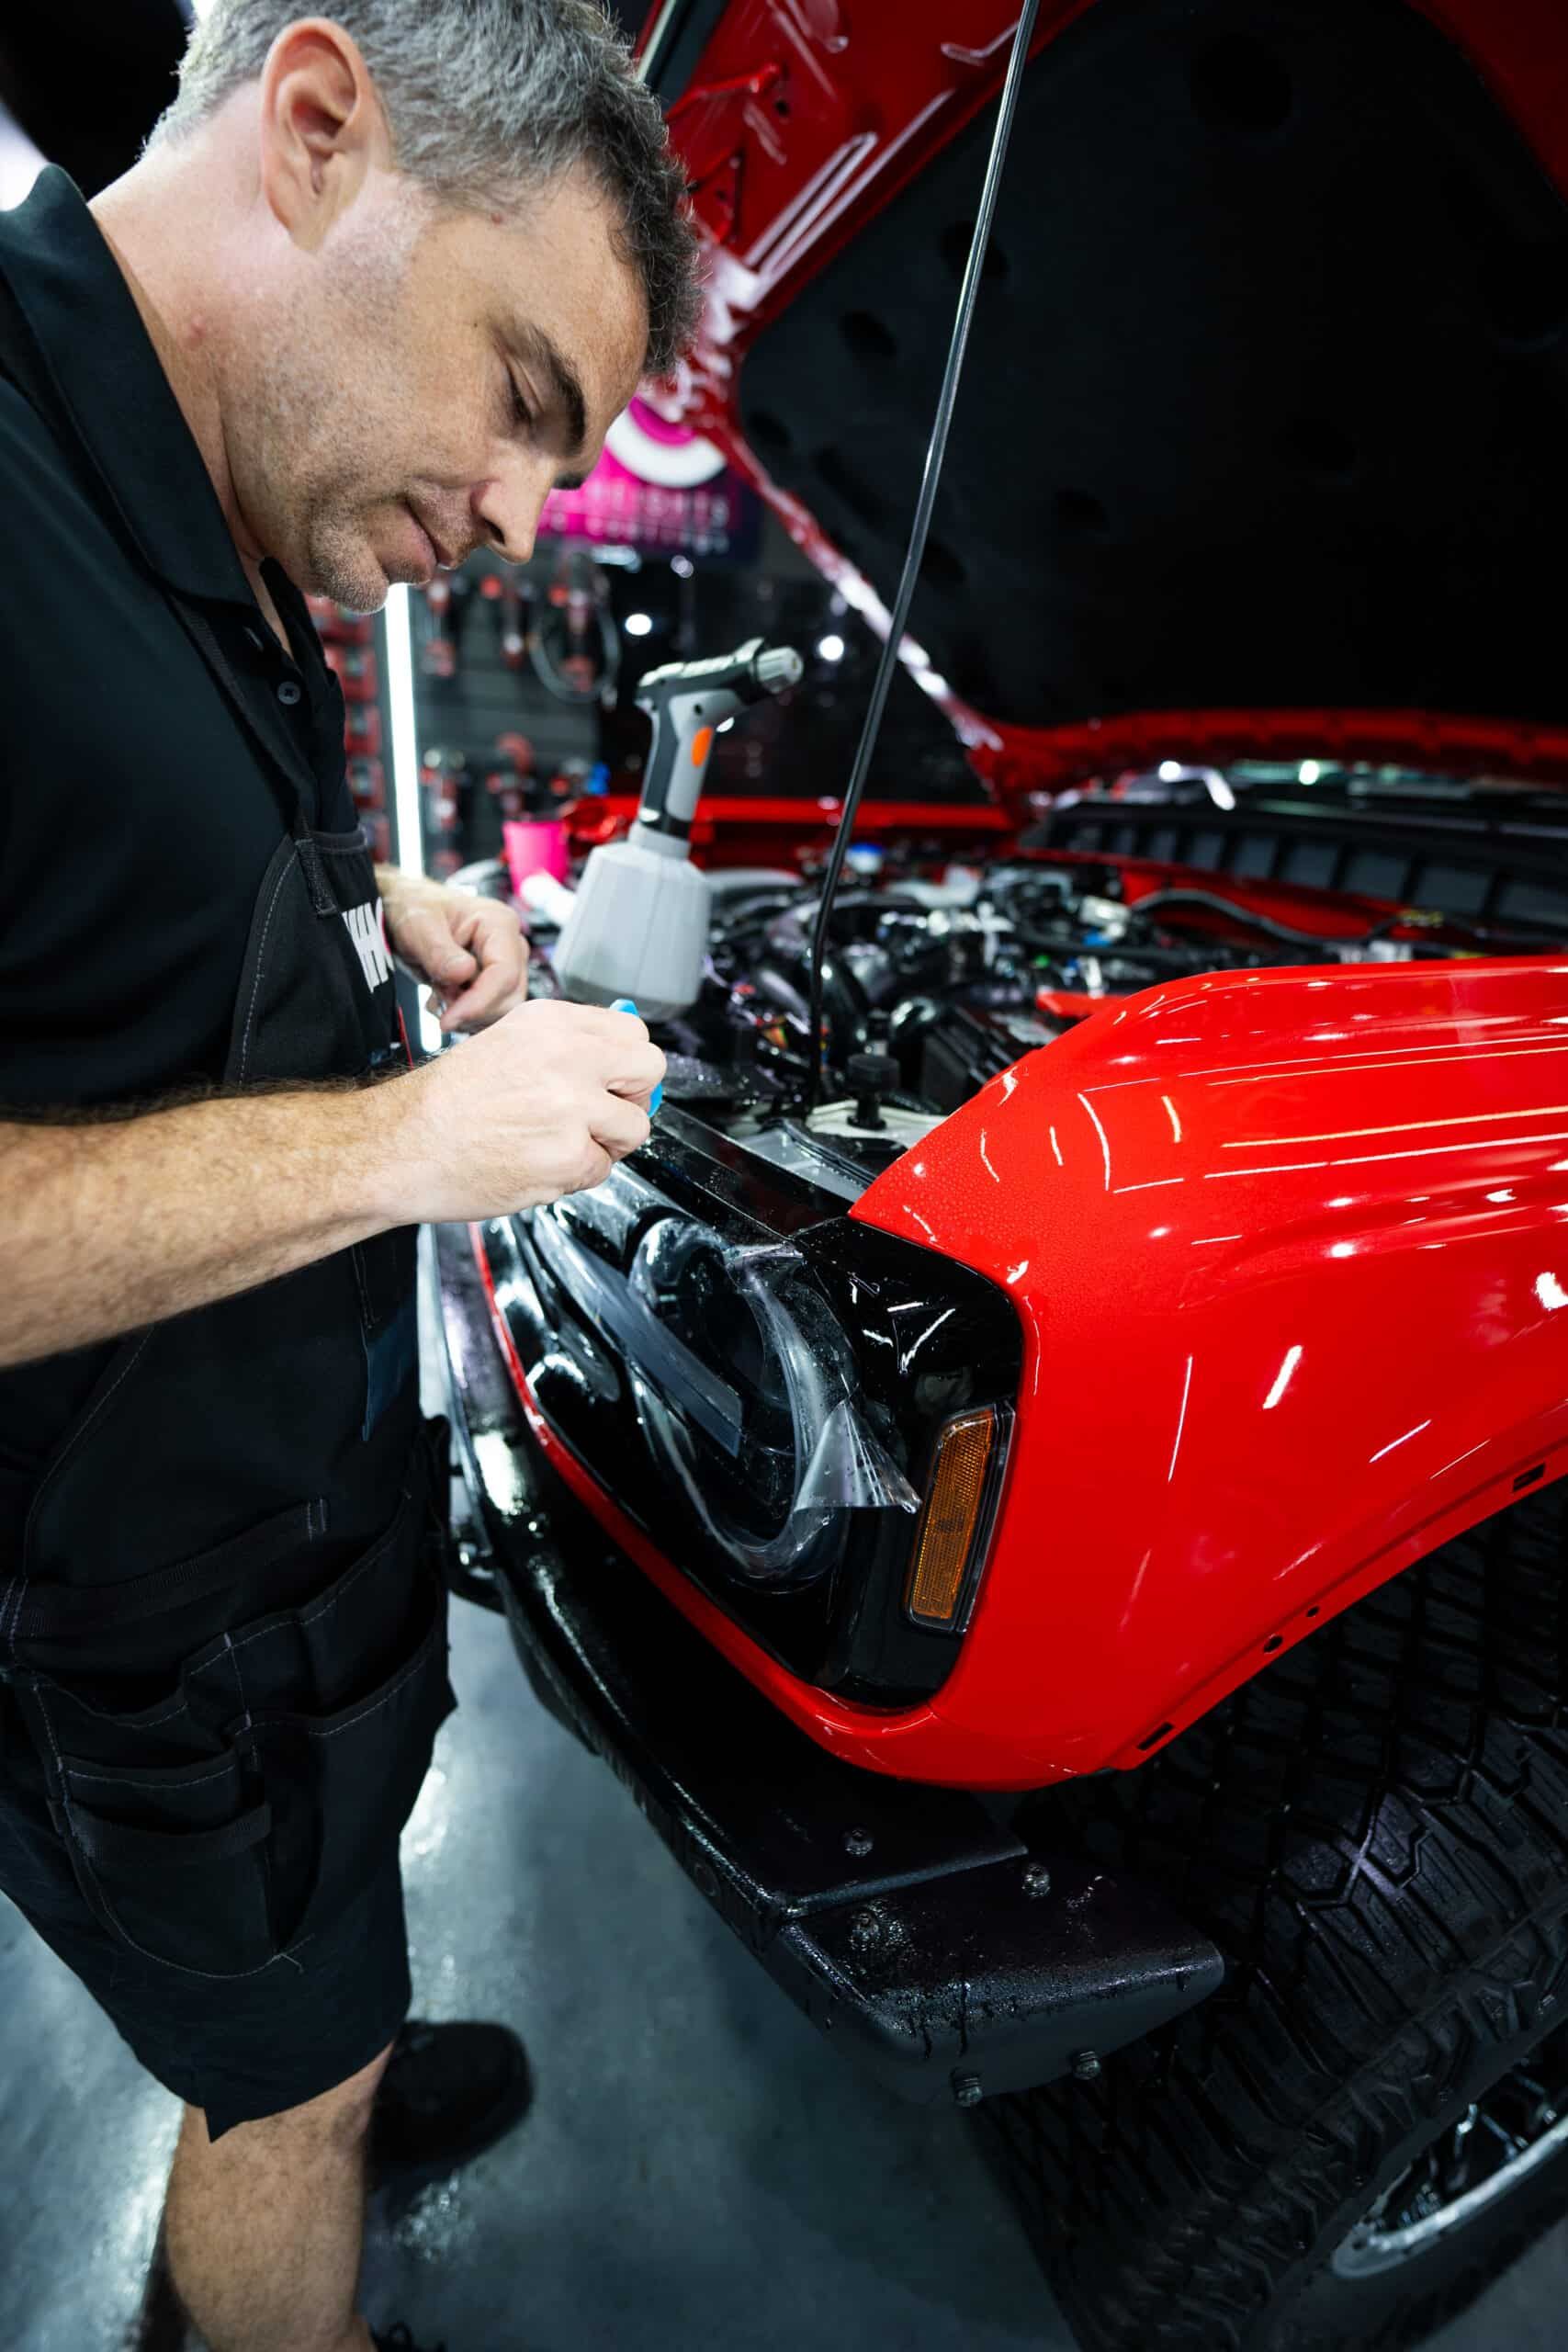 A man is working on a red car with the hood open